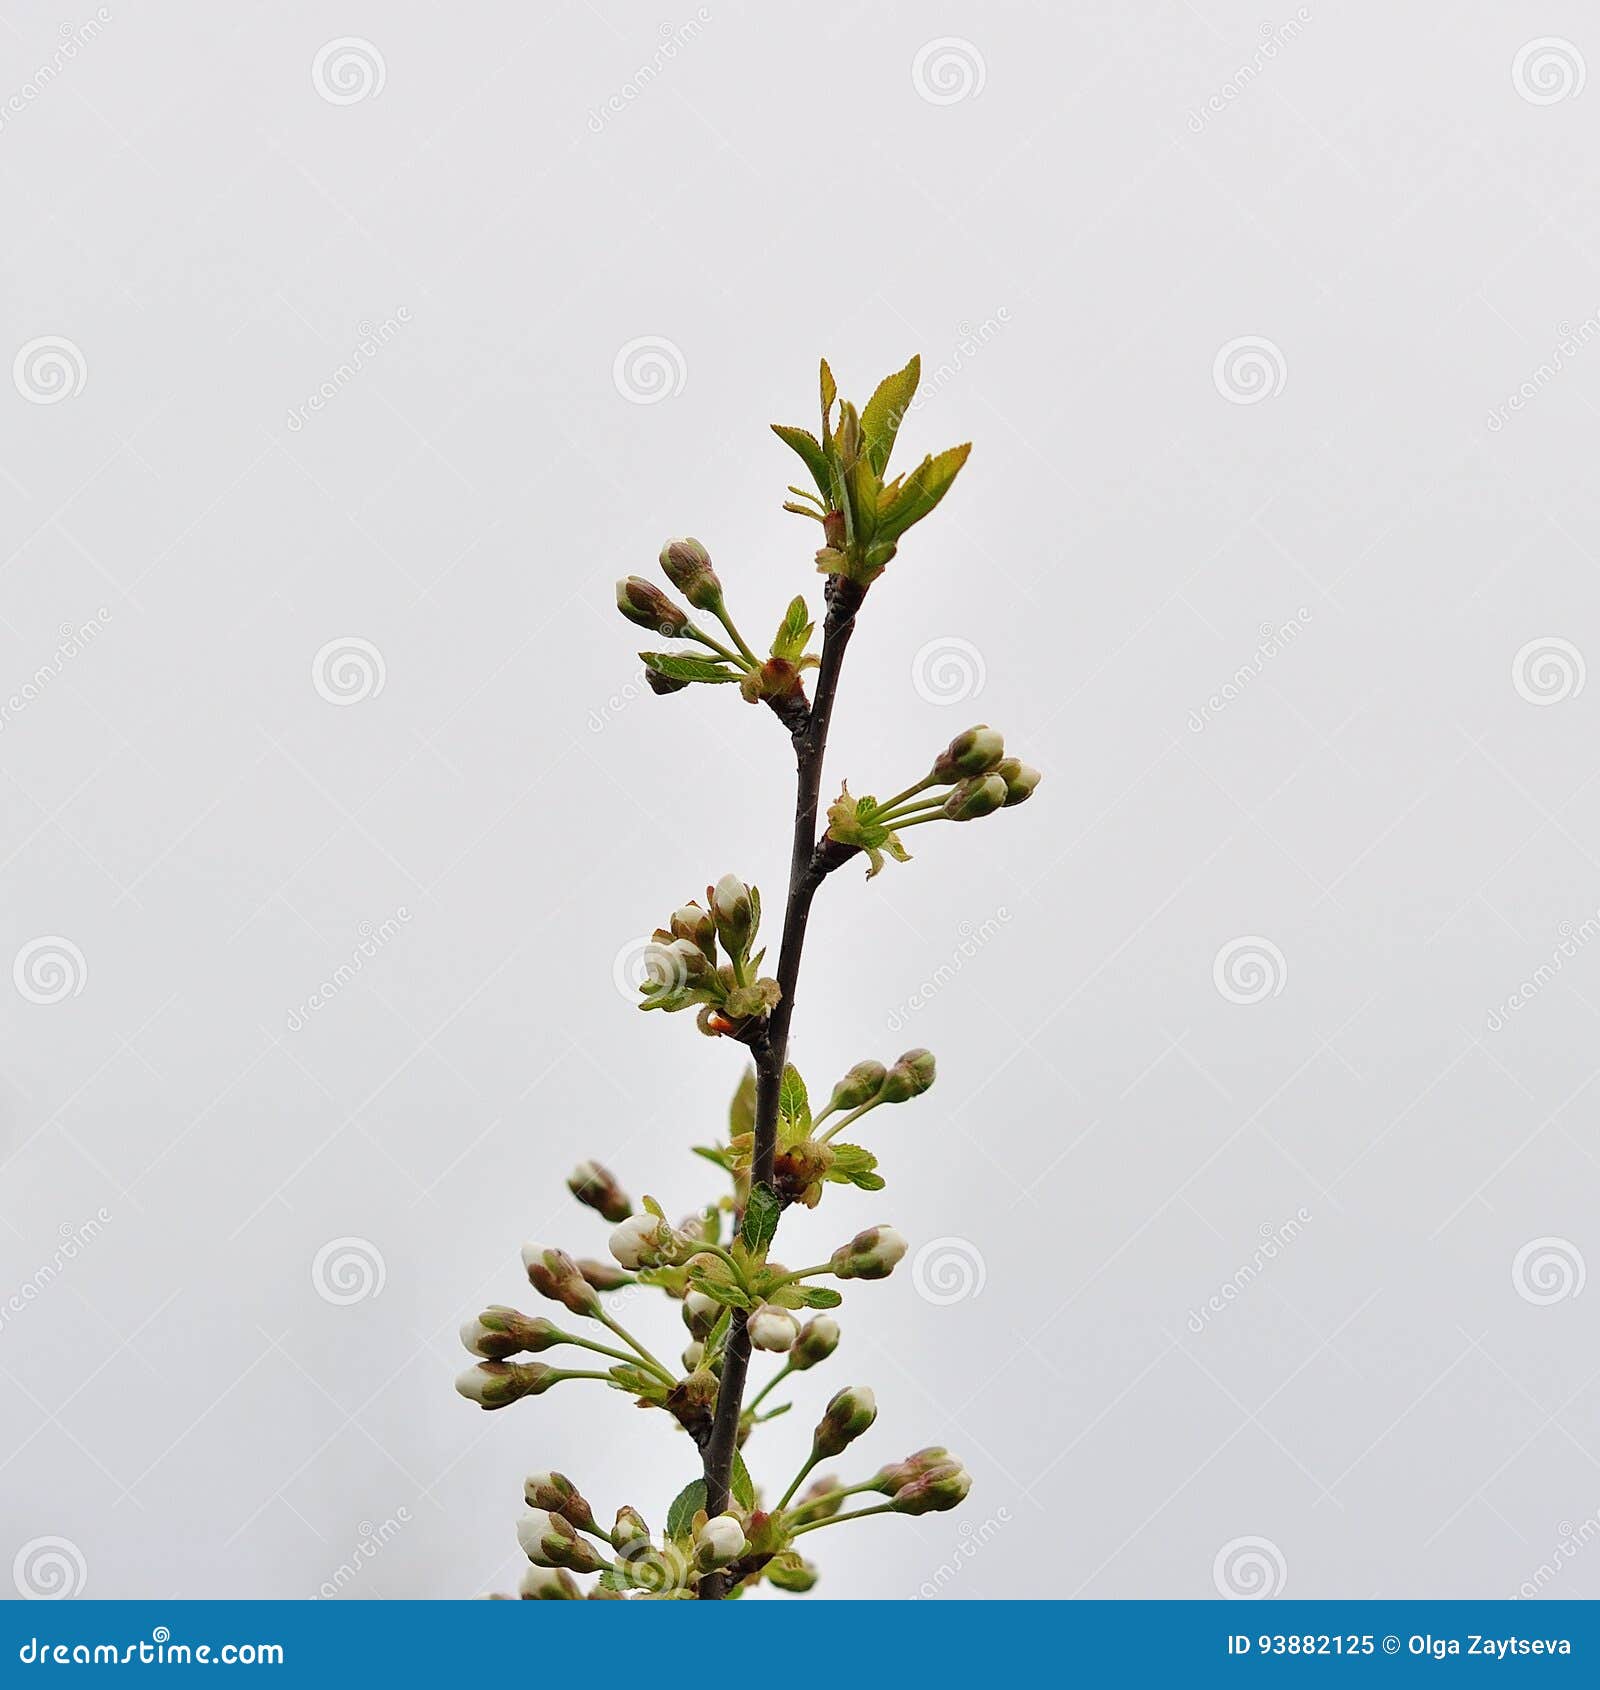 Blossoming Branches of a Tree. Stock Image - Image of angle, march